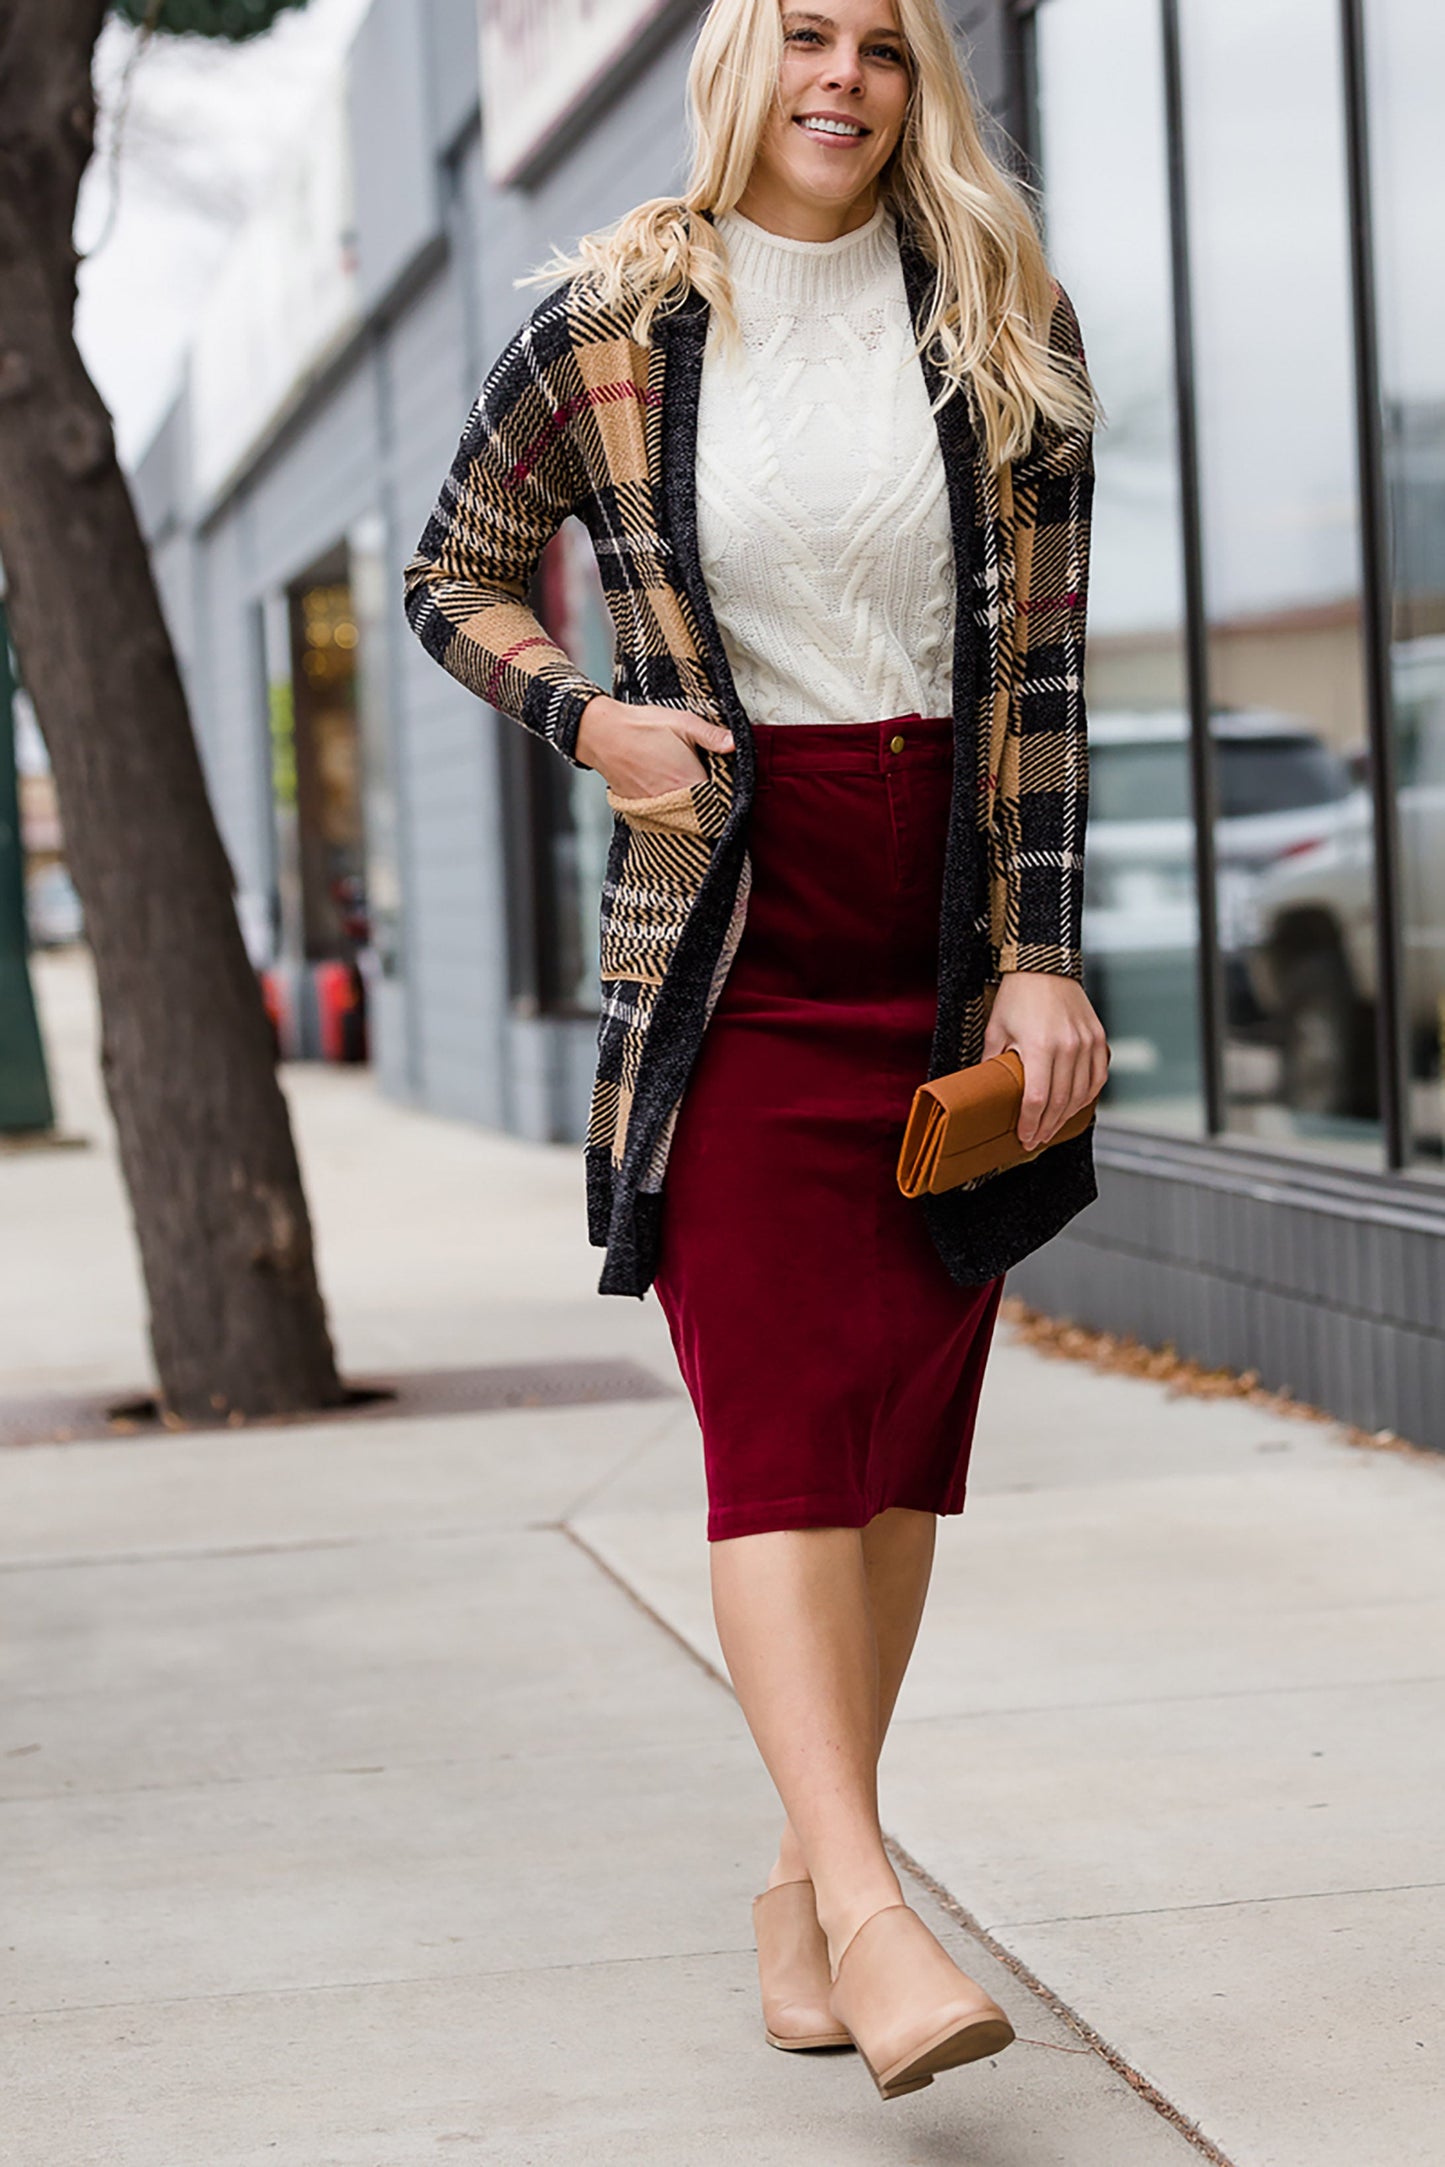 Plaid Open Front Cardigan - FINAL SALE Layering Essentials